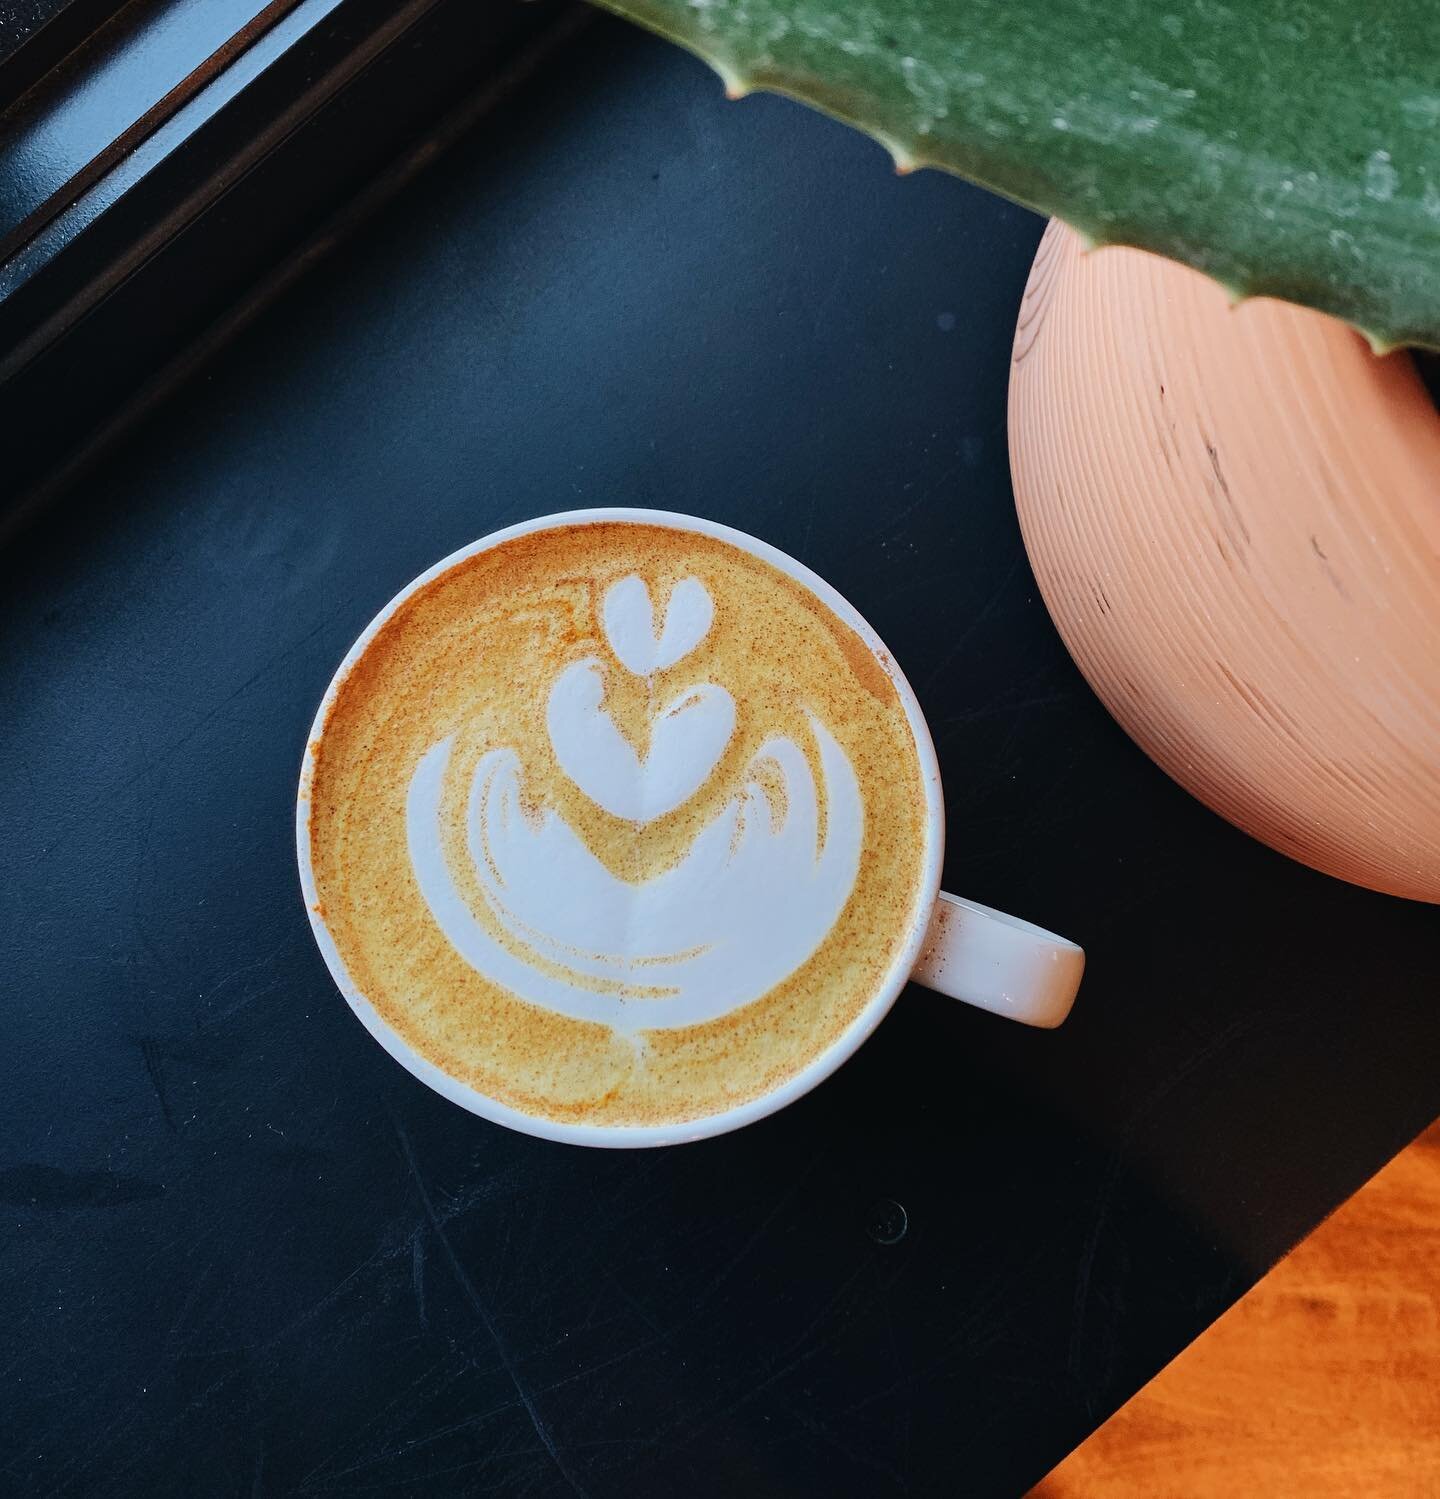 It&rsquo;s baaaack 👀 the Honey Turmeric Latte was such a hit last spring, we brought it back! Made in-house with honey, turmeric, and a mix of warm spices, it&rsquo;s fresh and lightly sweet - perfect for the transition into warmer days ☕️